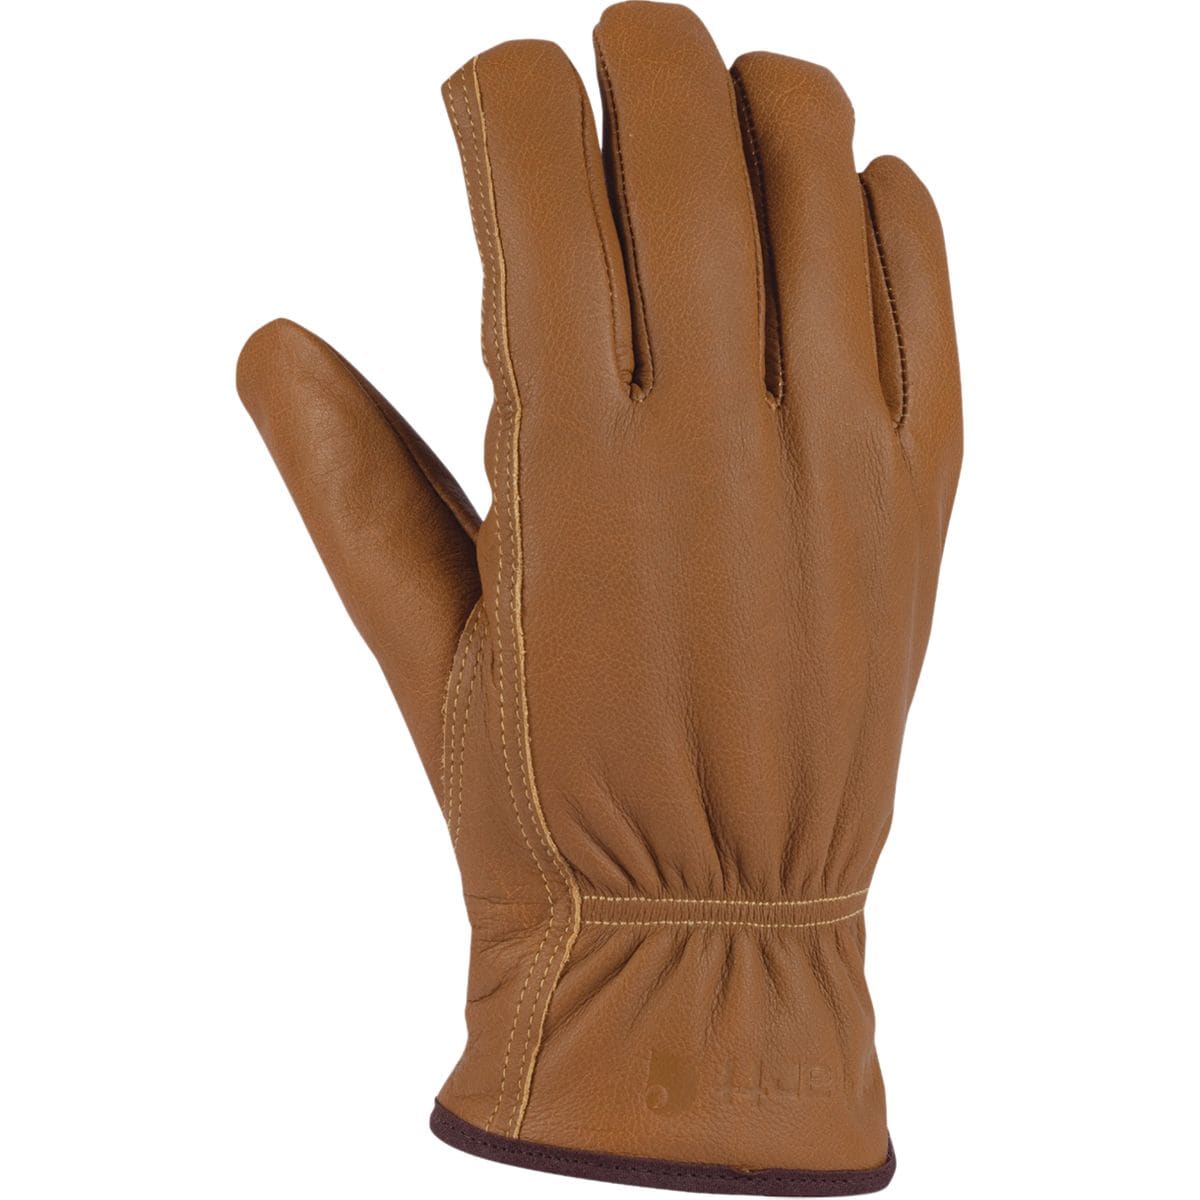 Carhartt Gloves Insulated Leather Driver Glove